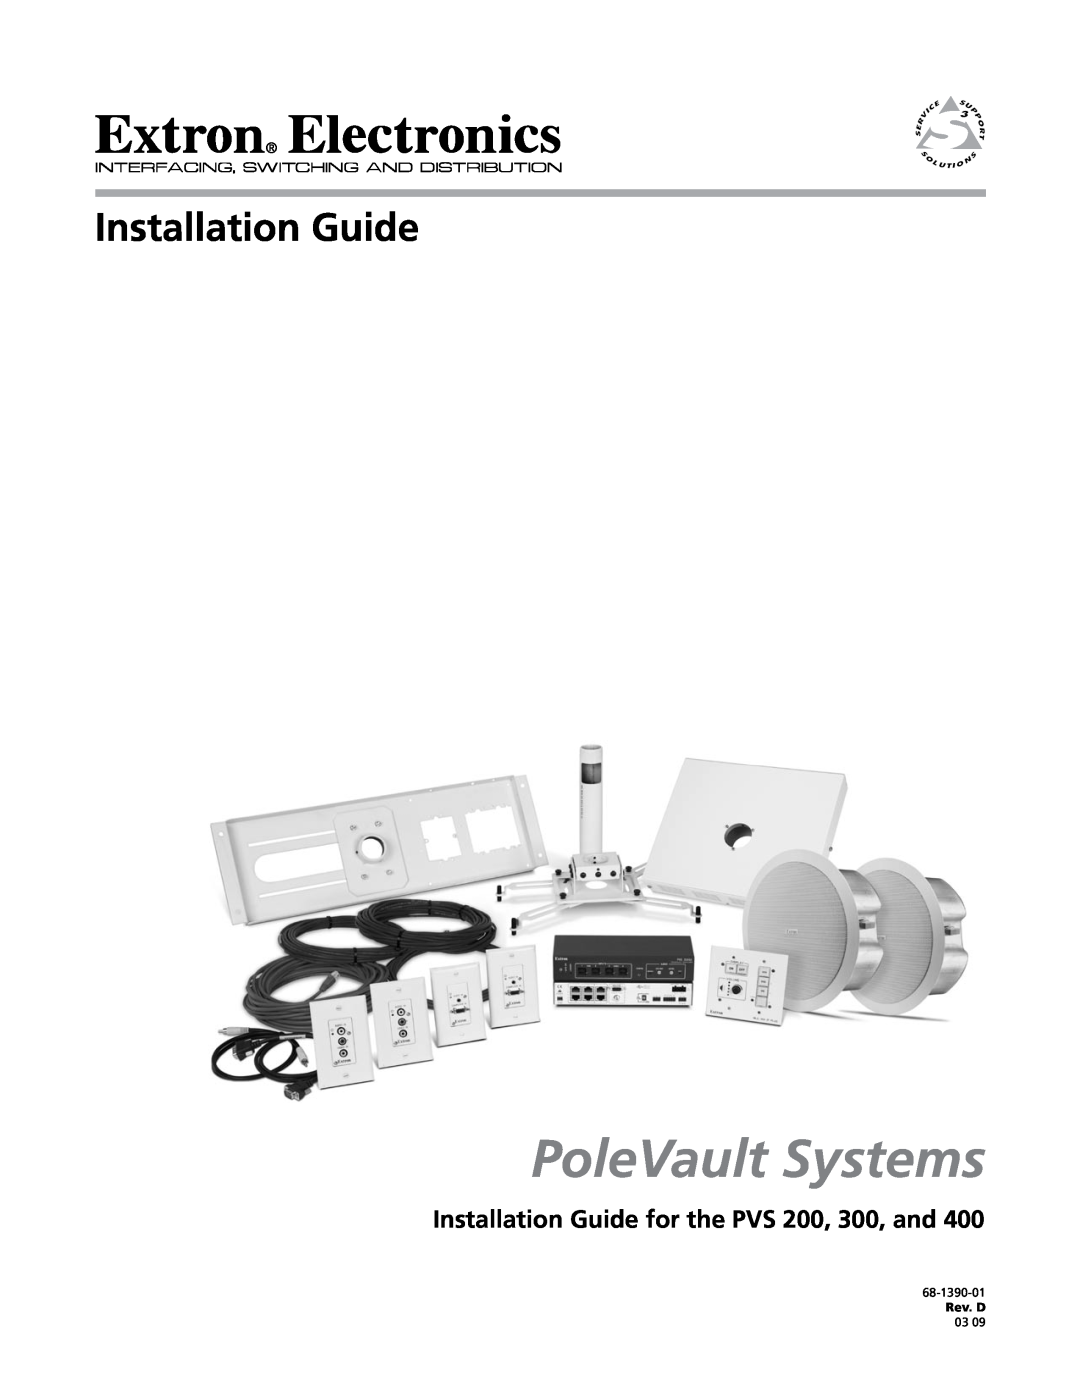 Extron electronic PVS 400 manual Installation Guide for the PVS 200, 300, and, PoleVault Systems, 68-1390-01, Rev. D 